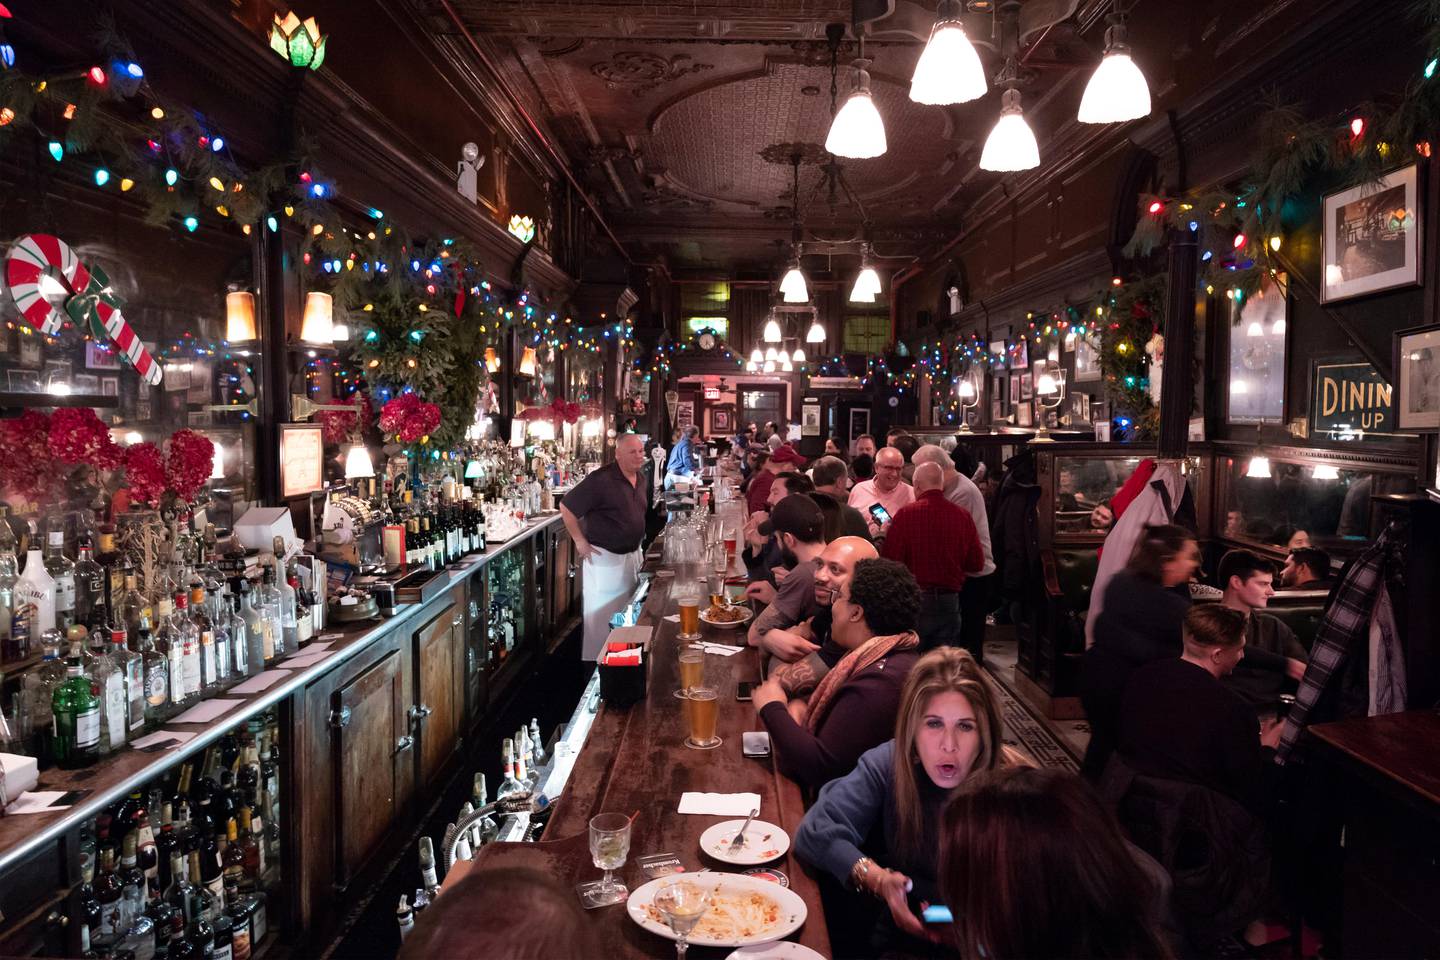 In this Dec. 27, 2019 photo, customers mingle in New York's Old Town Bar. Once a speakeasy during Prohibition, the Old Town Bar opened in 1892. In this era of bottomless mimosas, craft beers and ever-present happy hours, its striking to recall that 100 years ago the United States imposed a nationwide ban on the production and sale of all types of alcohol. (AP Photo/Mark Lennihan)